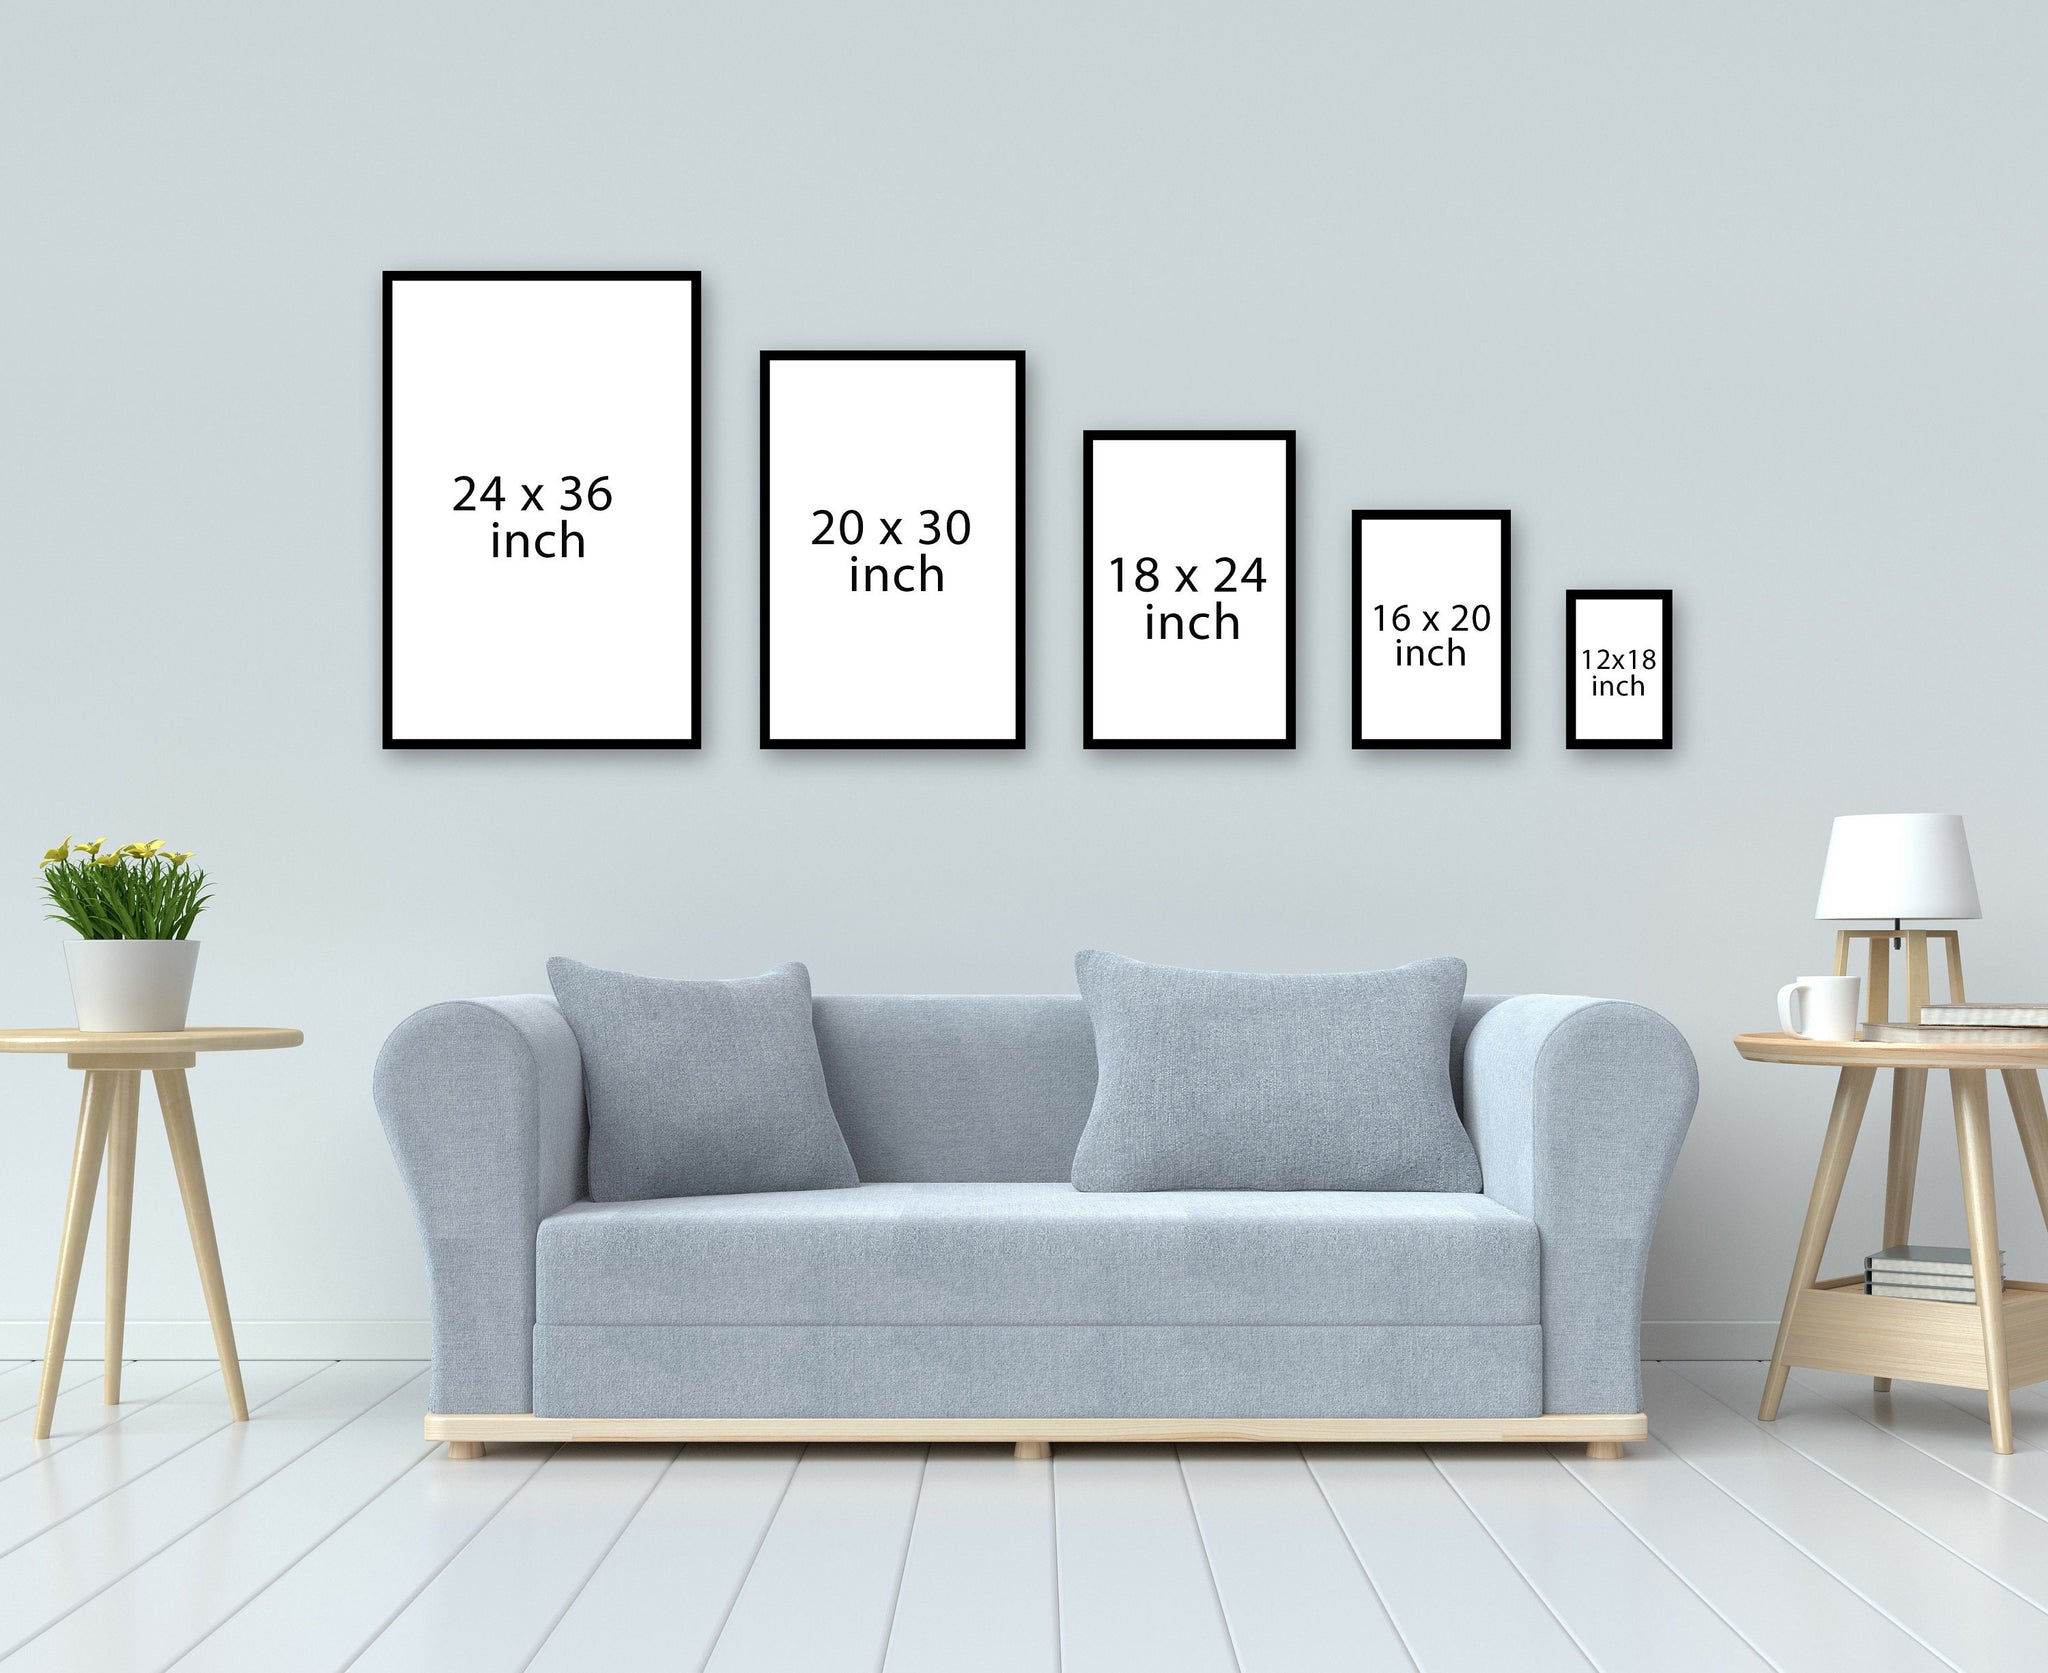 Yesterday Today Tomorrow, School wall decor, Office wall art, Kids room wall decor, Dorm room wall art, Inspirational quotes, Home wall art